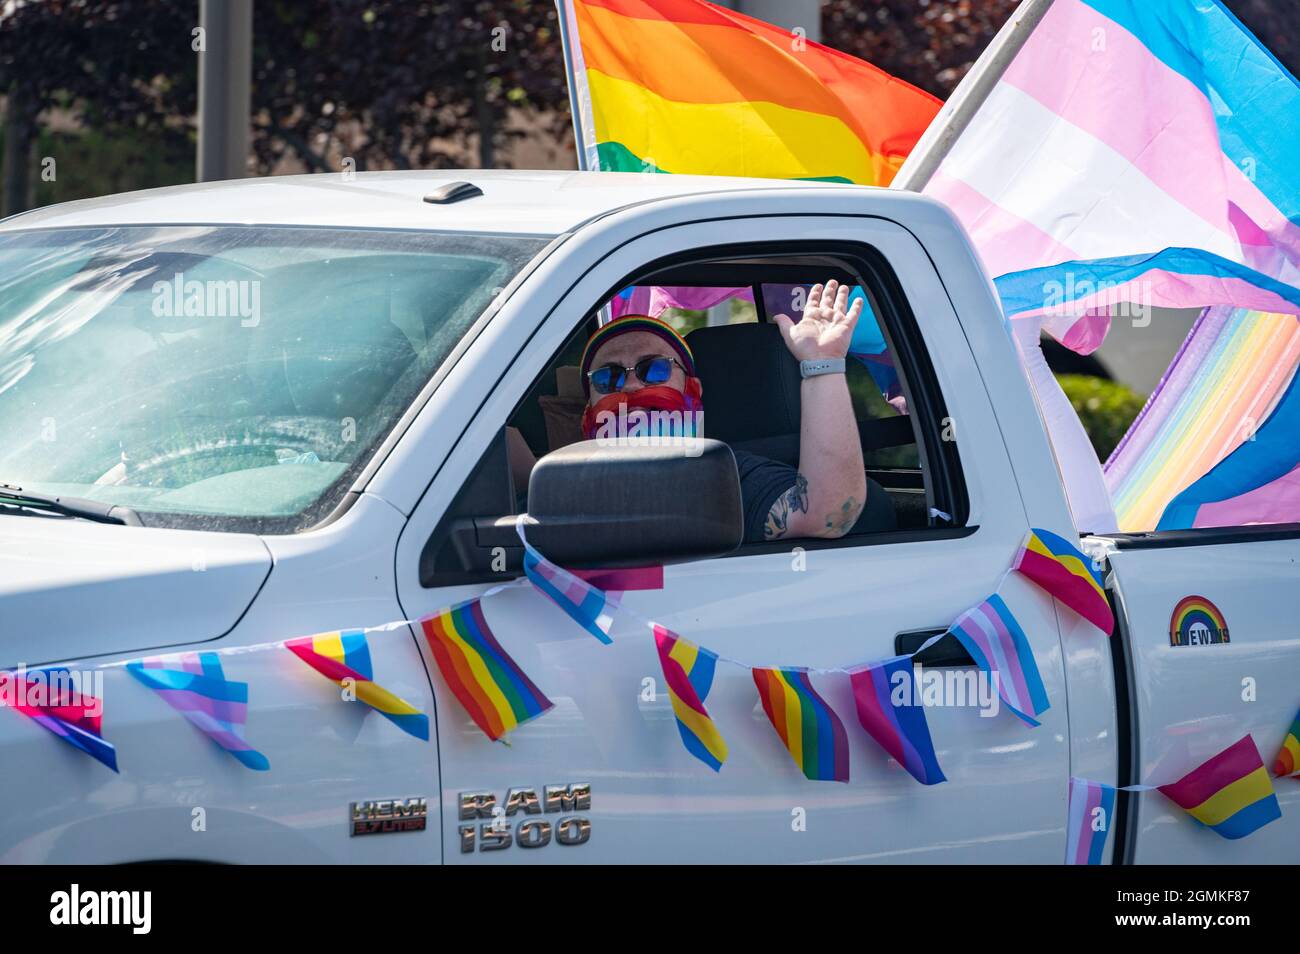 ROSEVILLE, CA, U.S.A. - SEPT. 19, 2021: Atom Vaughn, a trans man, waves in rainbow beard as he drives his decorated truck with rainbow and trans flag. Stock Photo